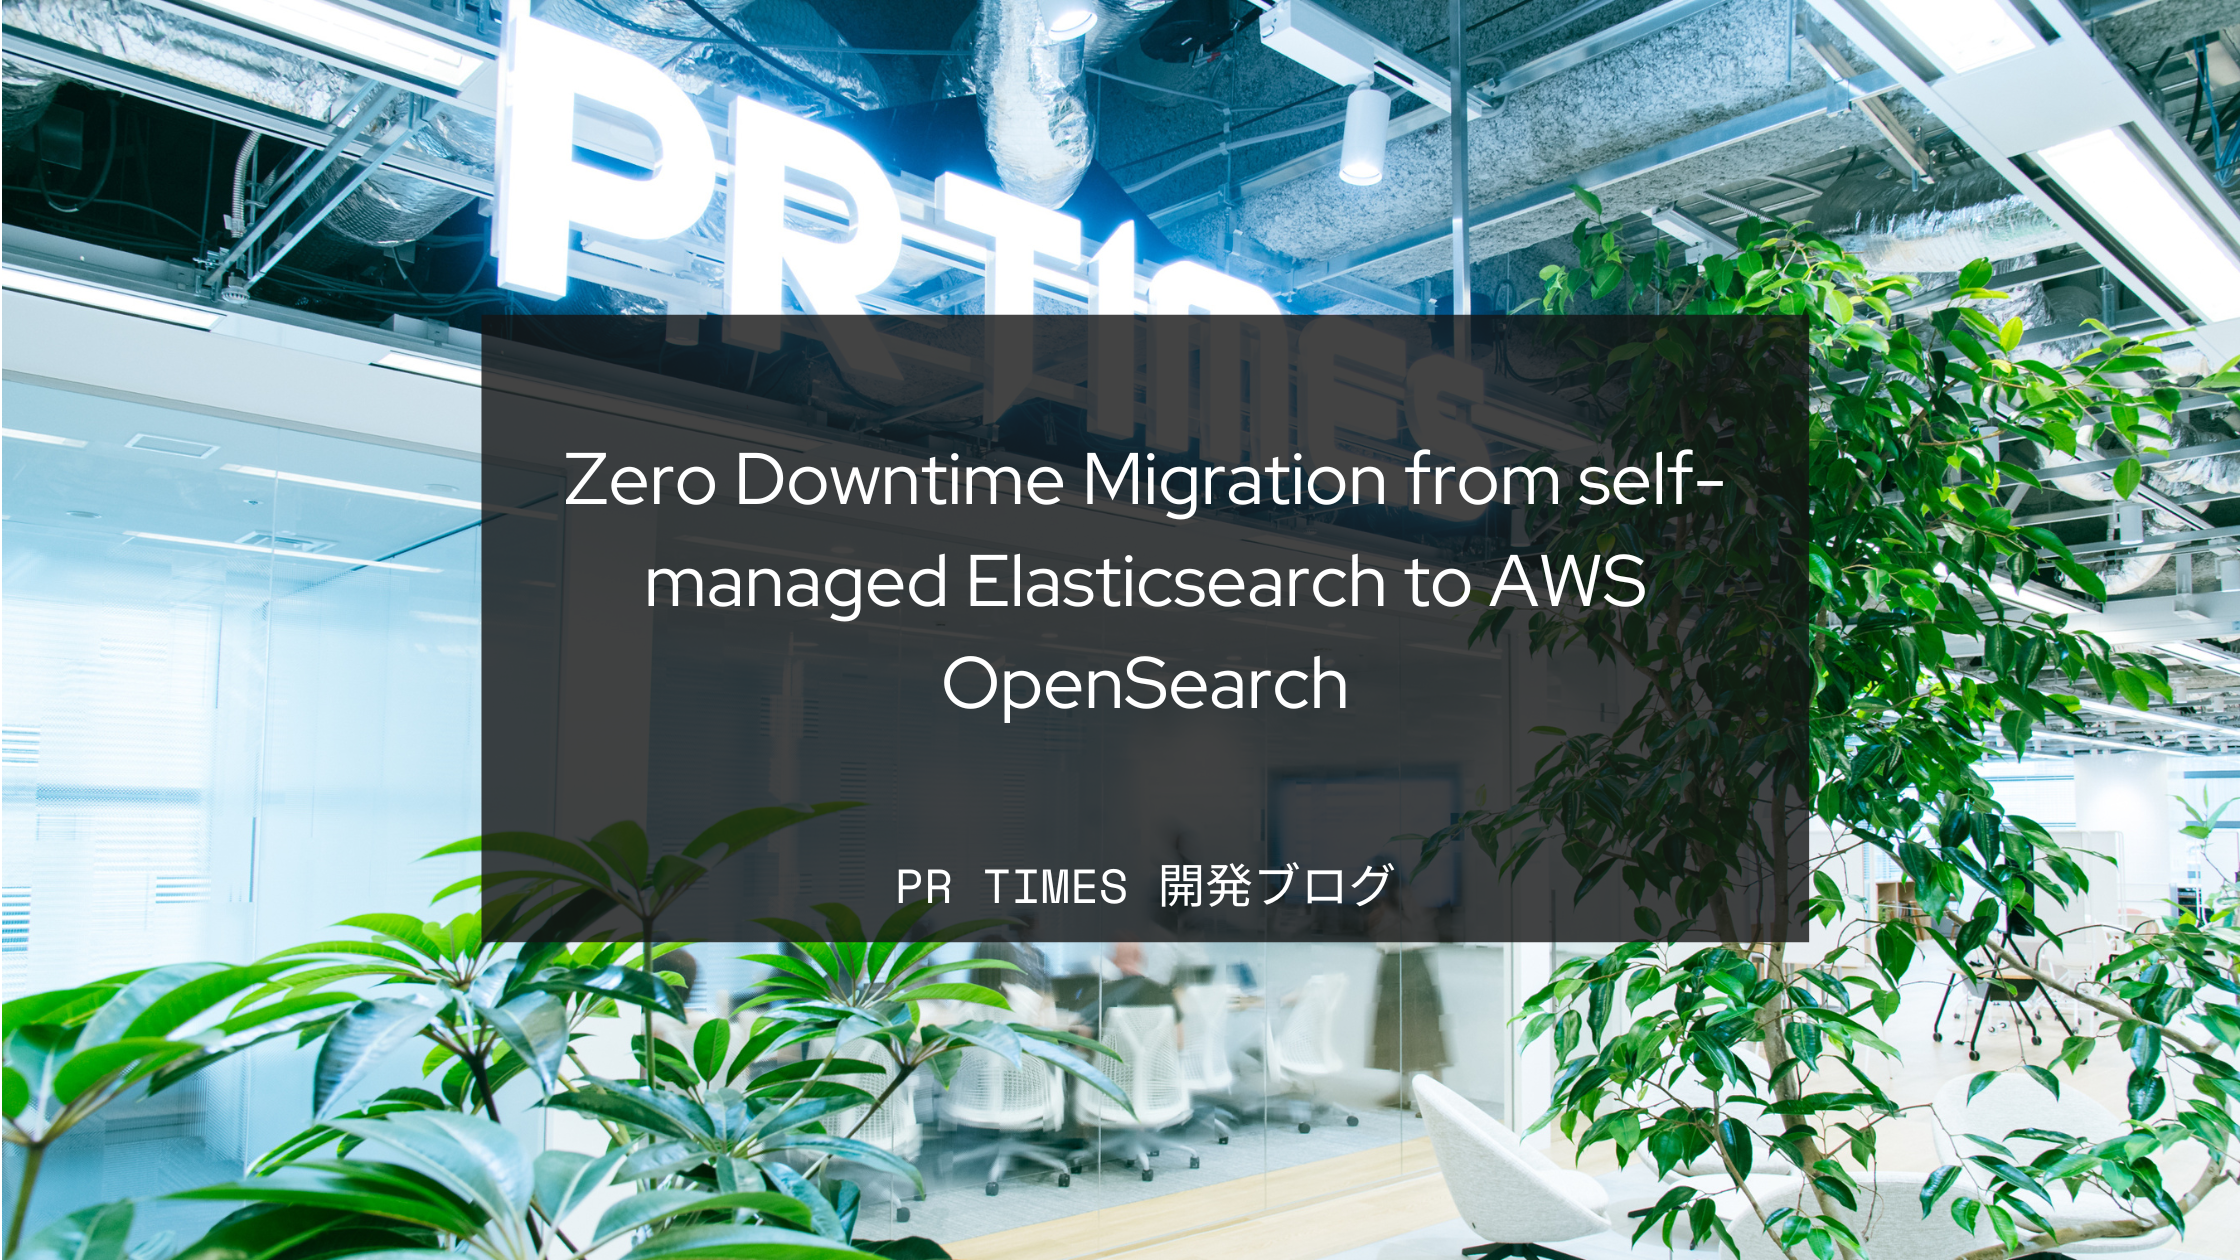 Zero Downtime Migration from self-managed Elasticsearch to AWS OpenSearch